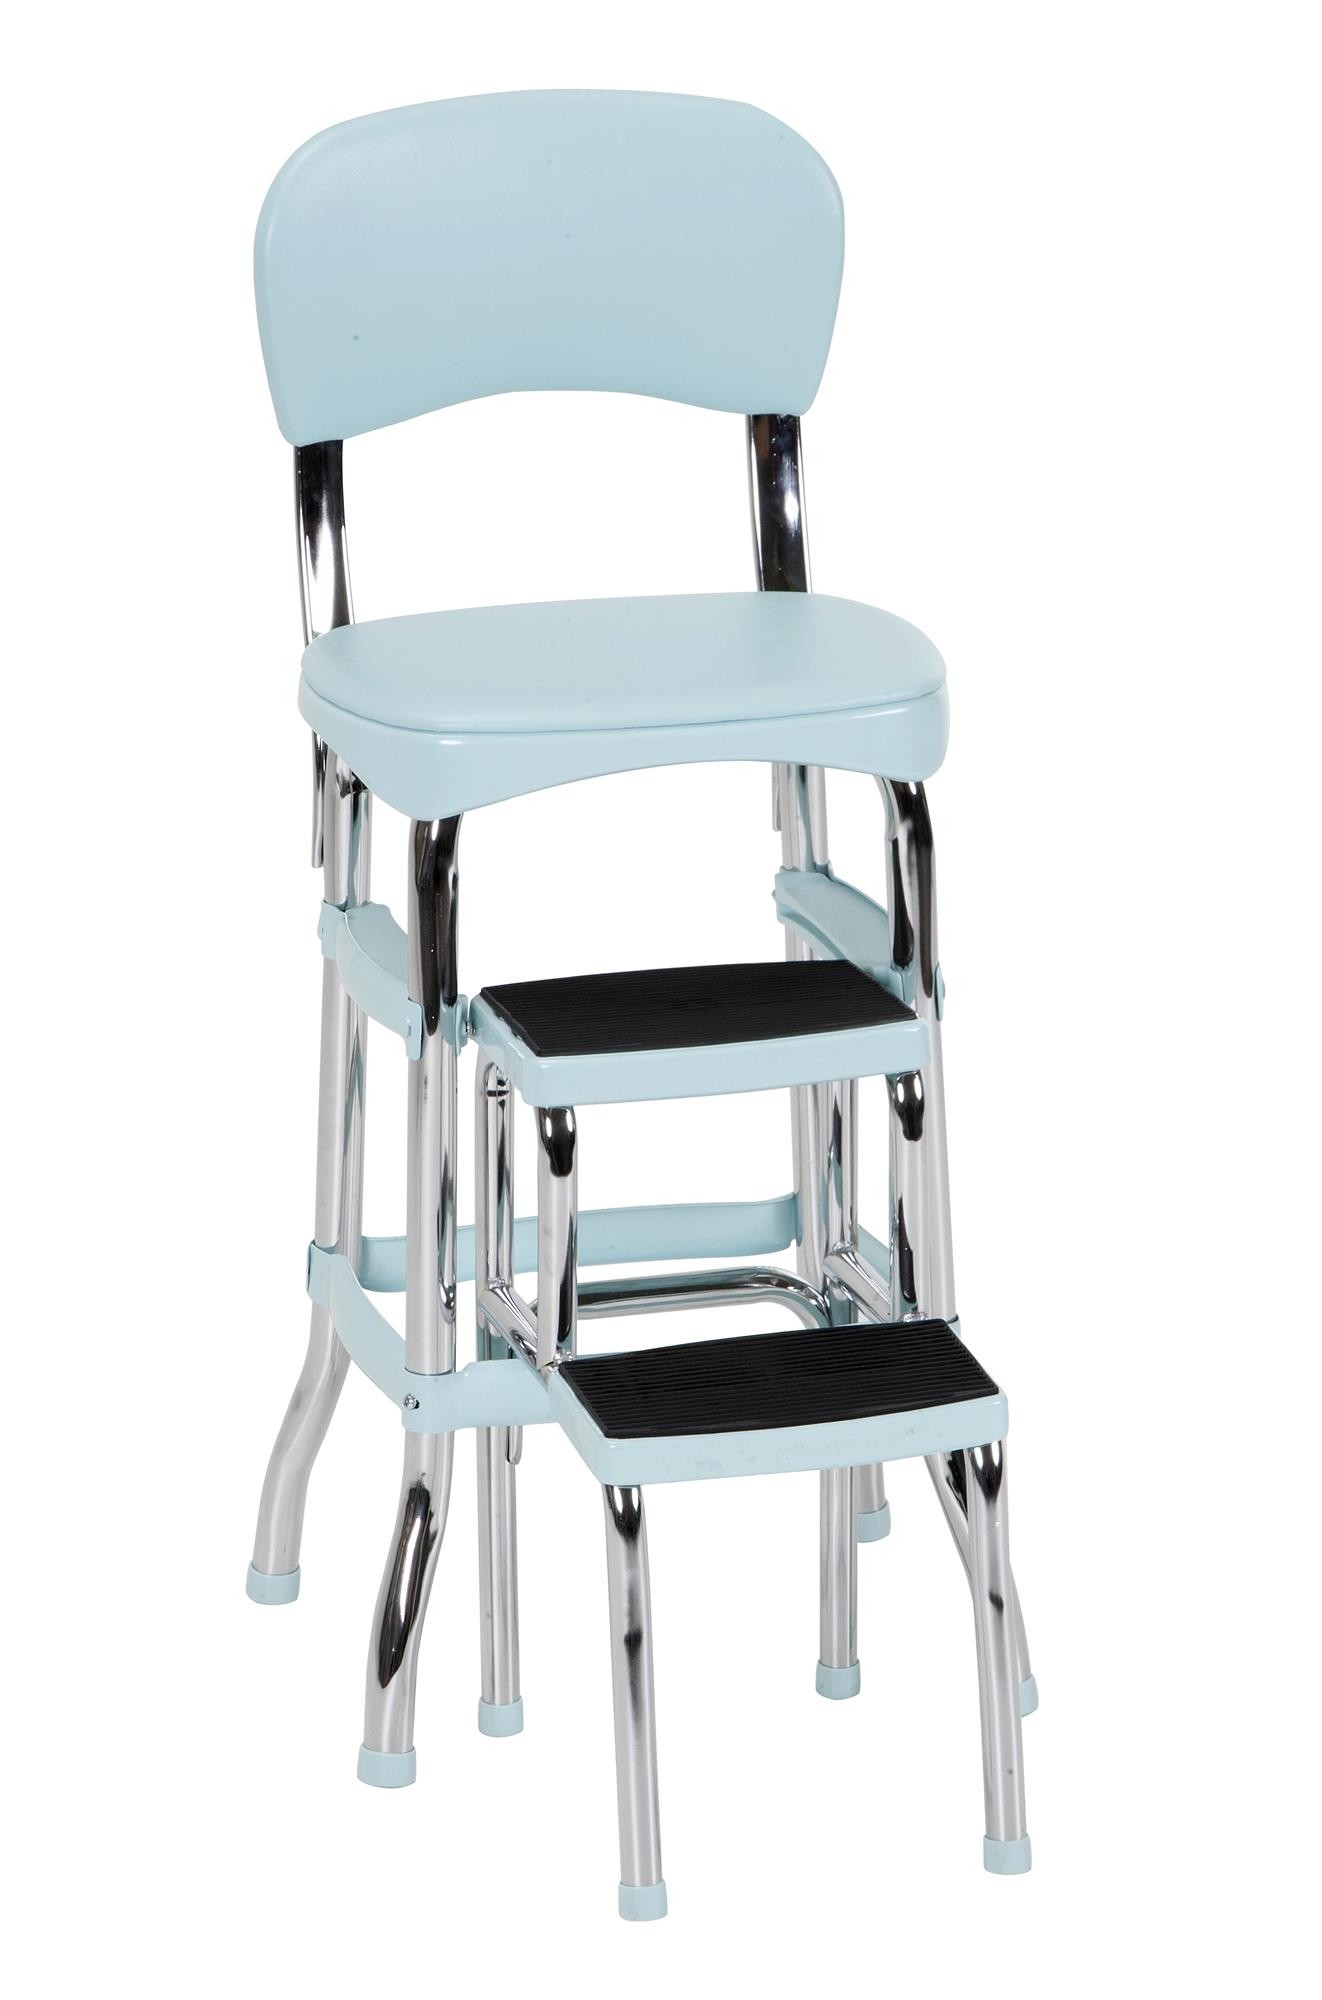 Cosco stylaire retro chair step stool with pull out